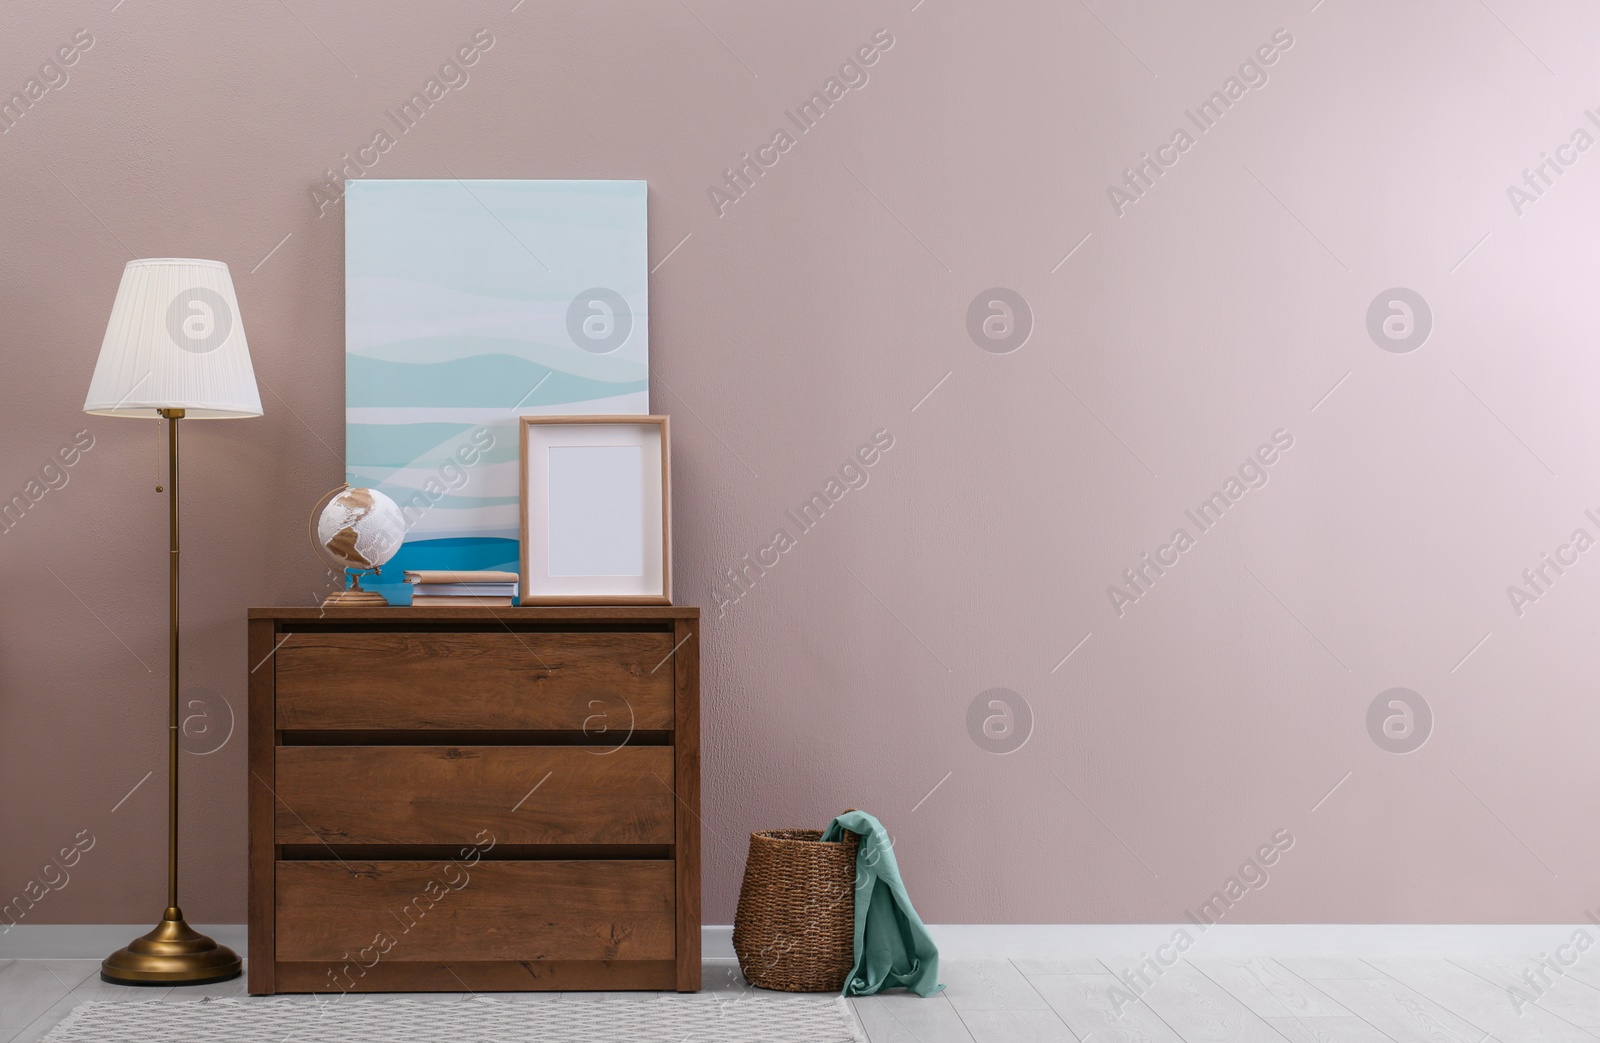 Photo of Wooden chest of drawers with globe, books and empty frame near beige wall in room, space for text. Interior design